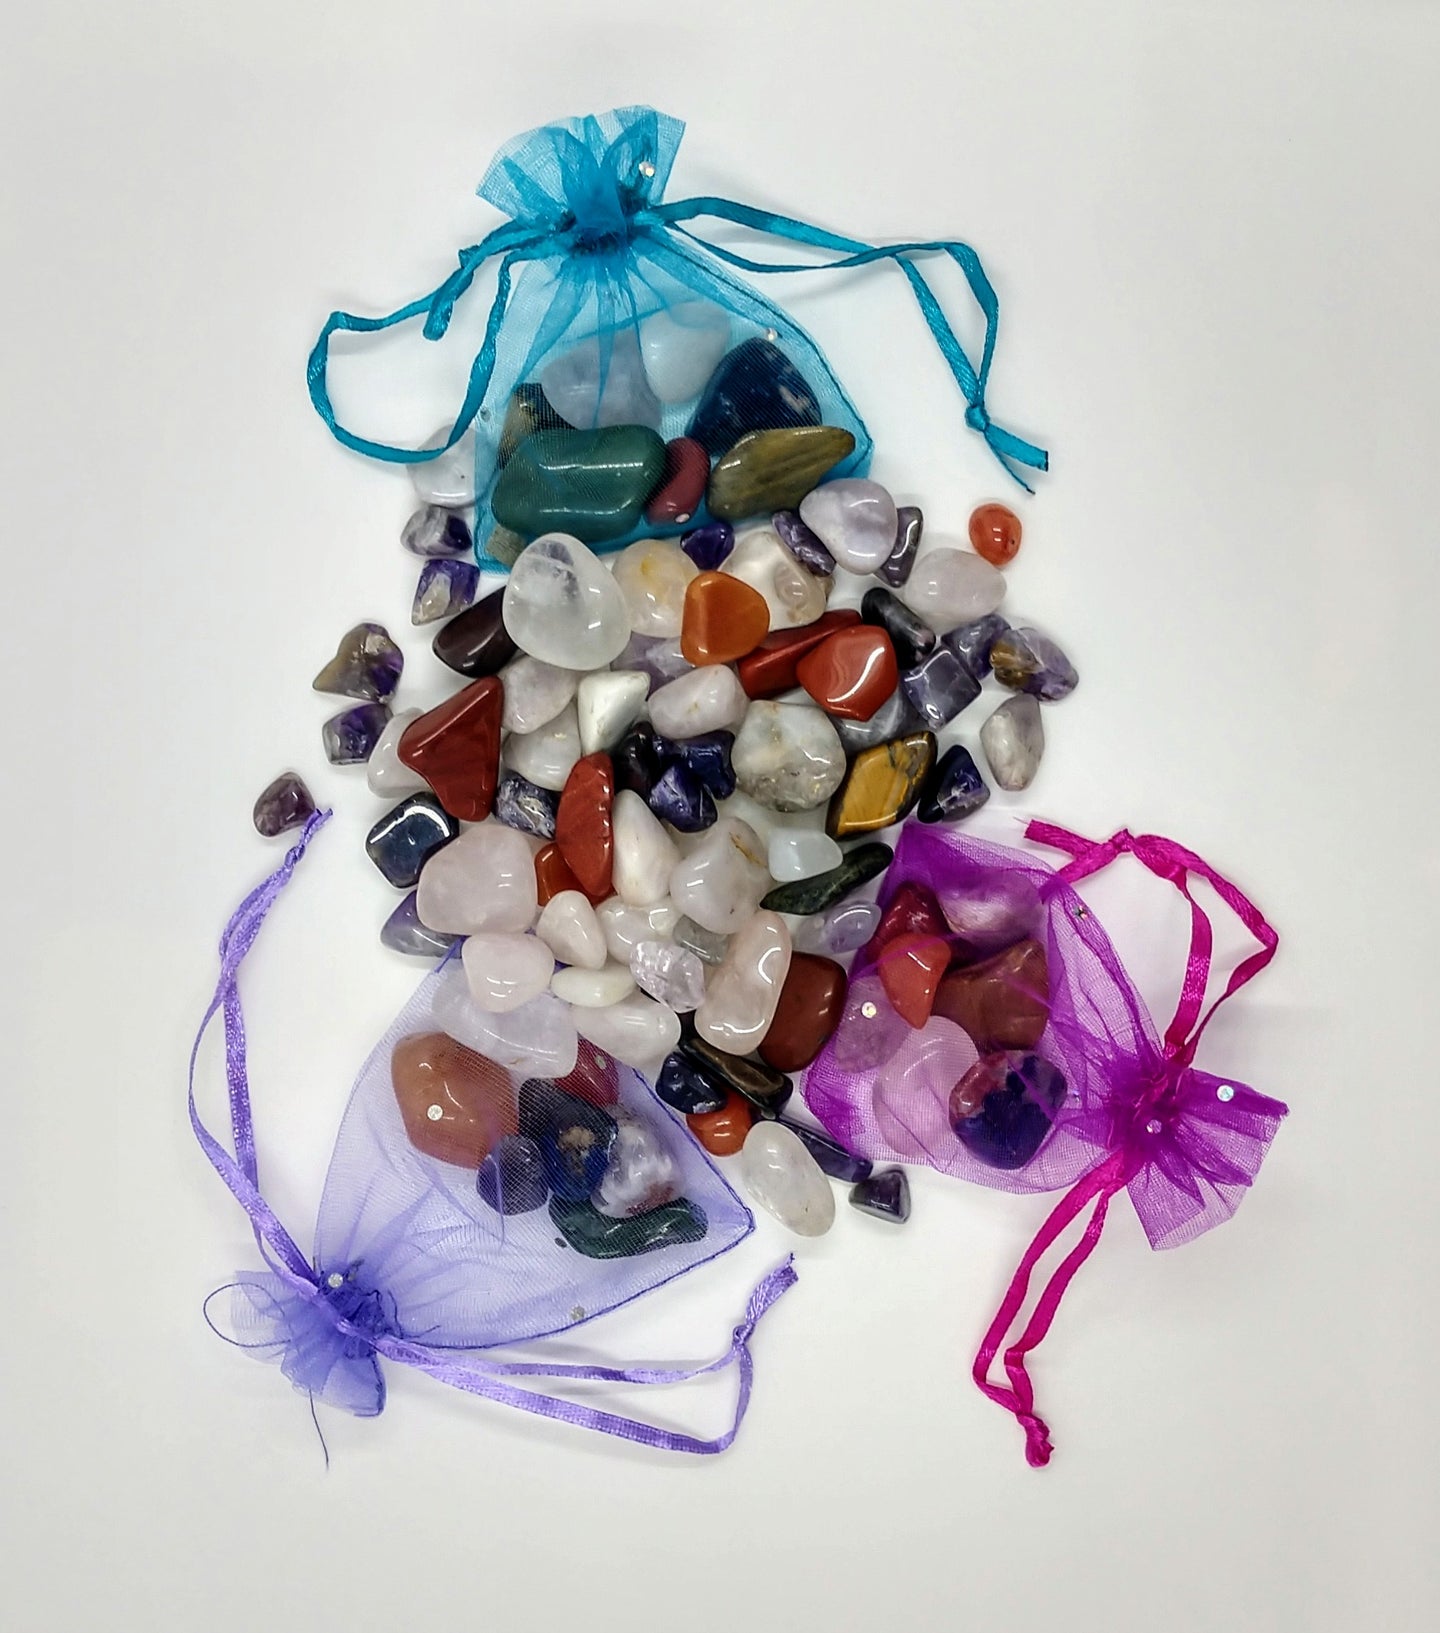 7 different crystals and stones that correspond to your 7 chakras.  Perfect to use with your Buddha bands!  Clear quartz - Crown chakra Amethyst - Third eye chakra Sodalite - Throat chakra Aventurine - Heart chakra Tiger's eye - Solar plexus chakra Carnelian - Sacral chakra Red jasper - Root chakra  Crystals may vary in size from 1/4